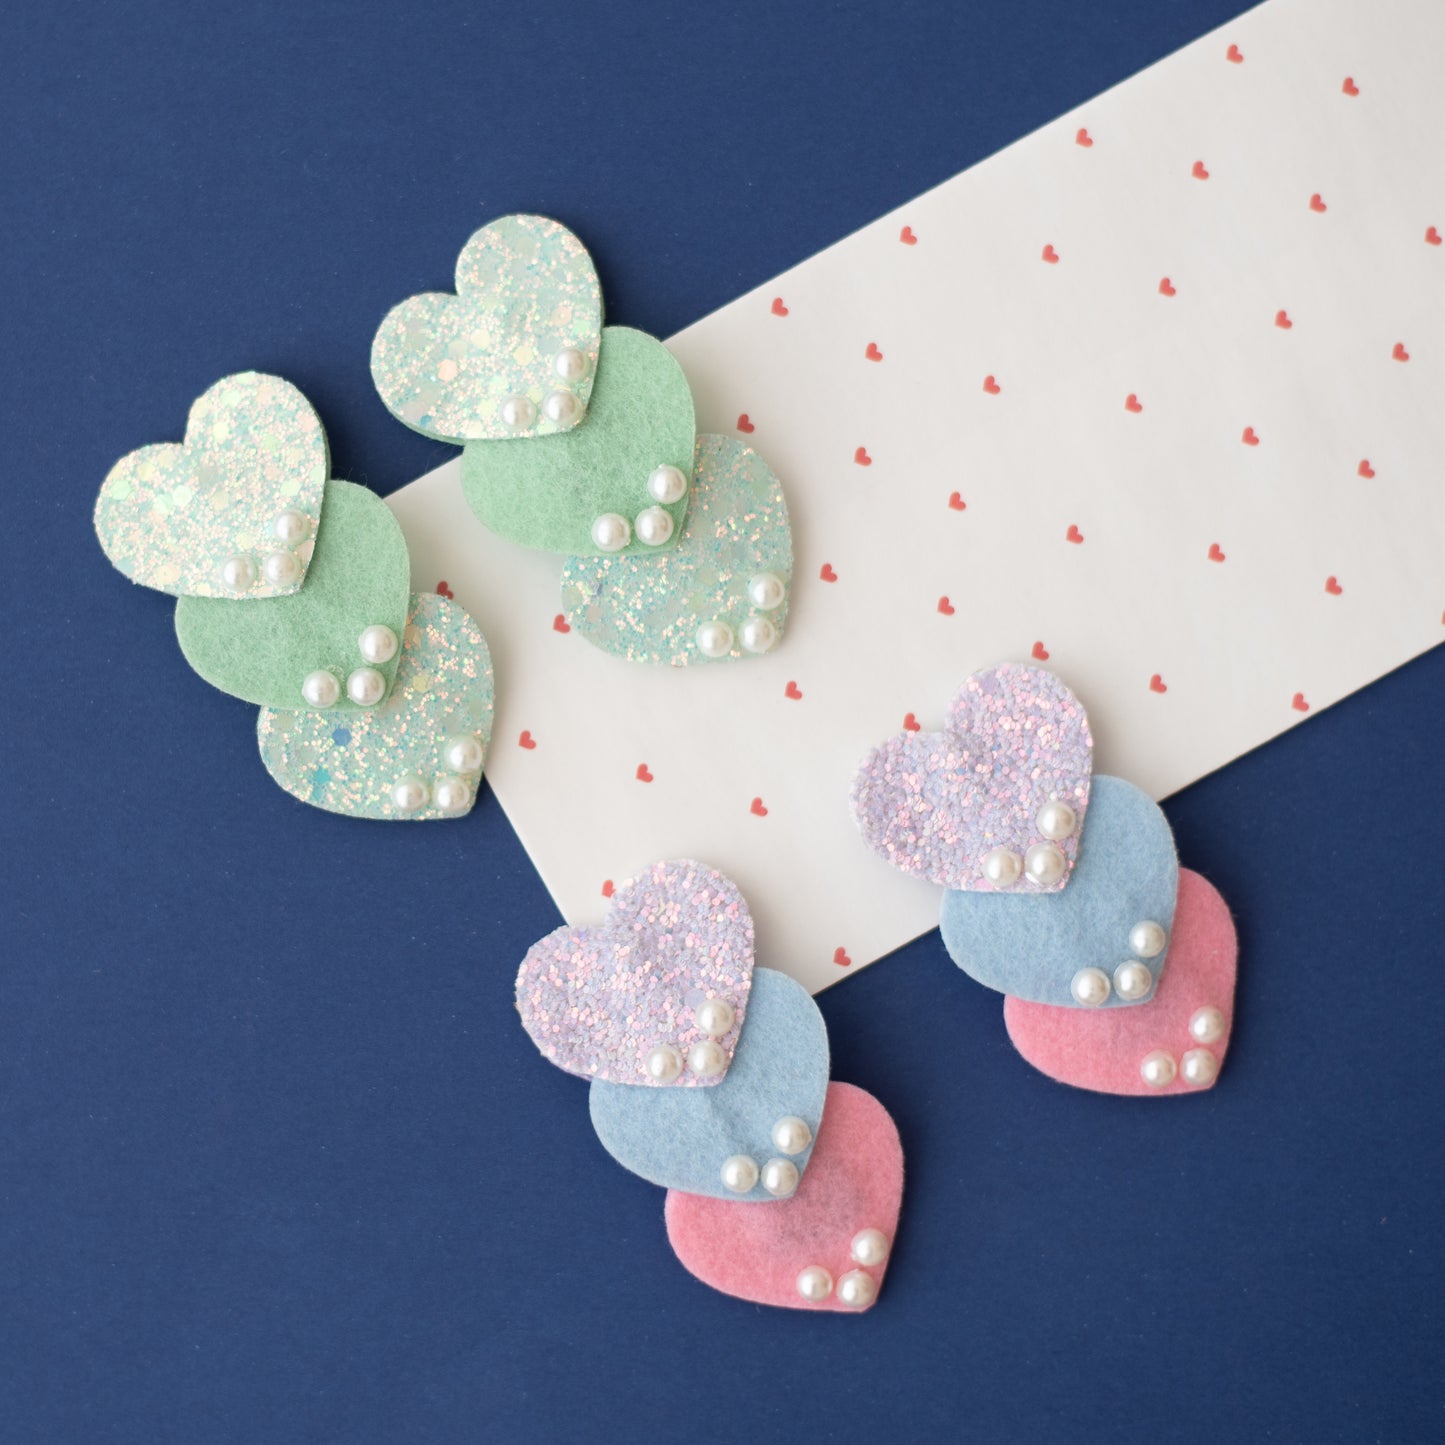 Combo : Set of 2 cute shimmer heart tic-tac pins embellished with pearls  - Sea green, Pink, Light blue